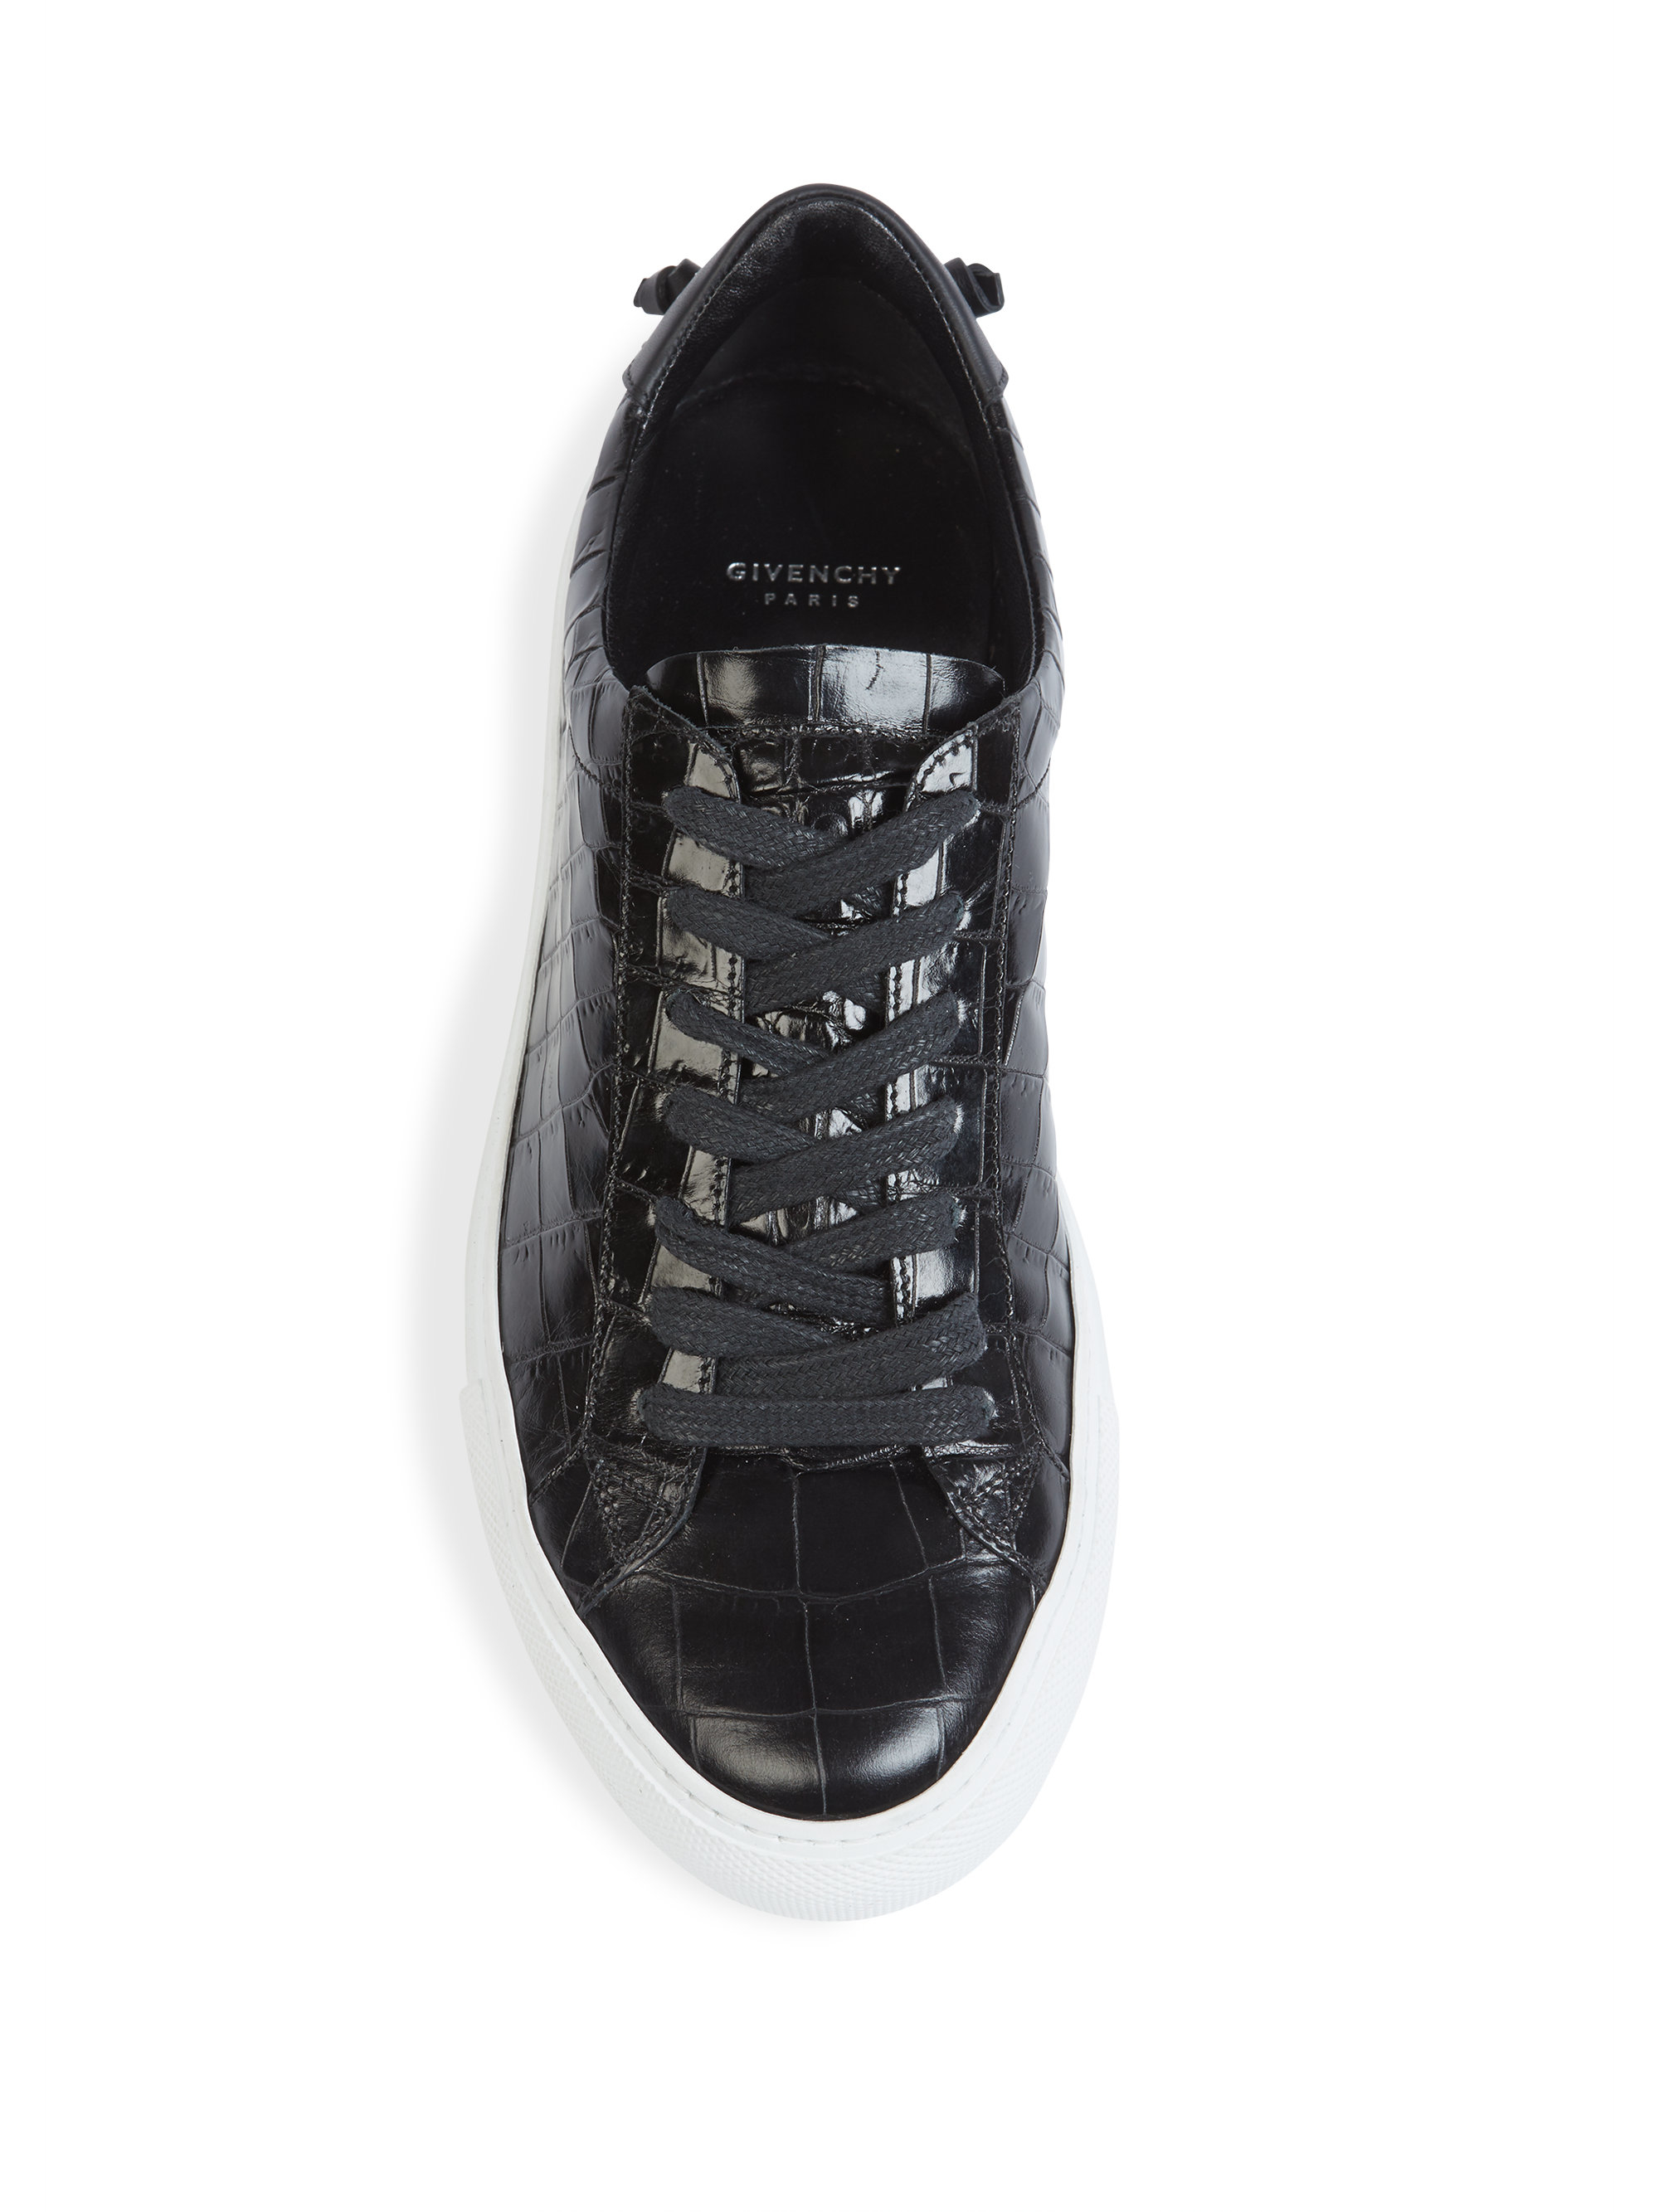 Givenchy Urban Street Croc-embossed Patent Leather Sneakers in Black ...